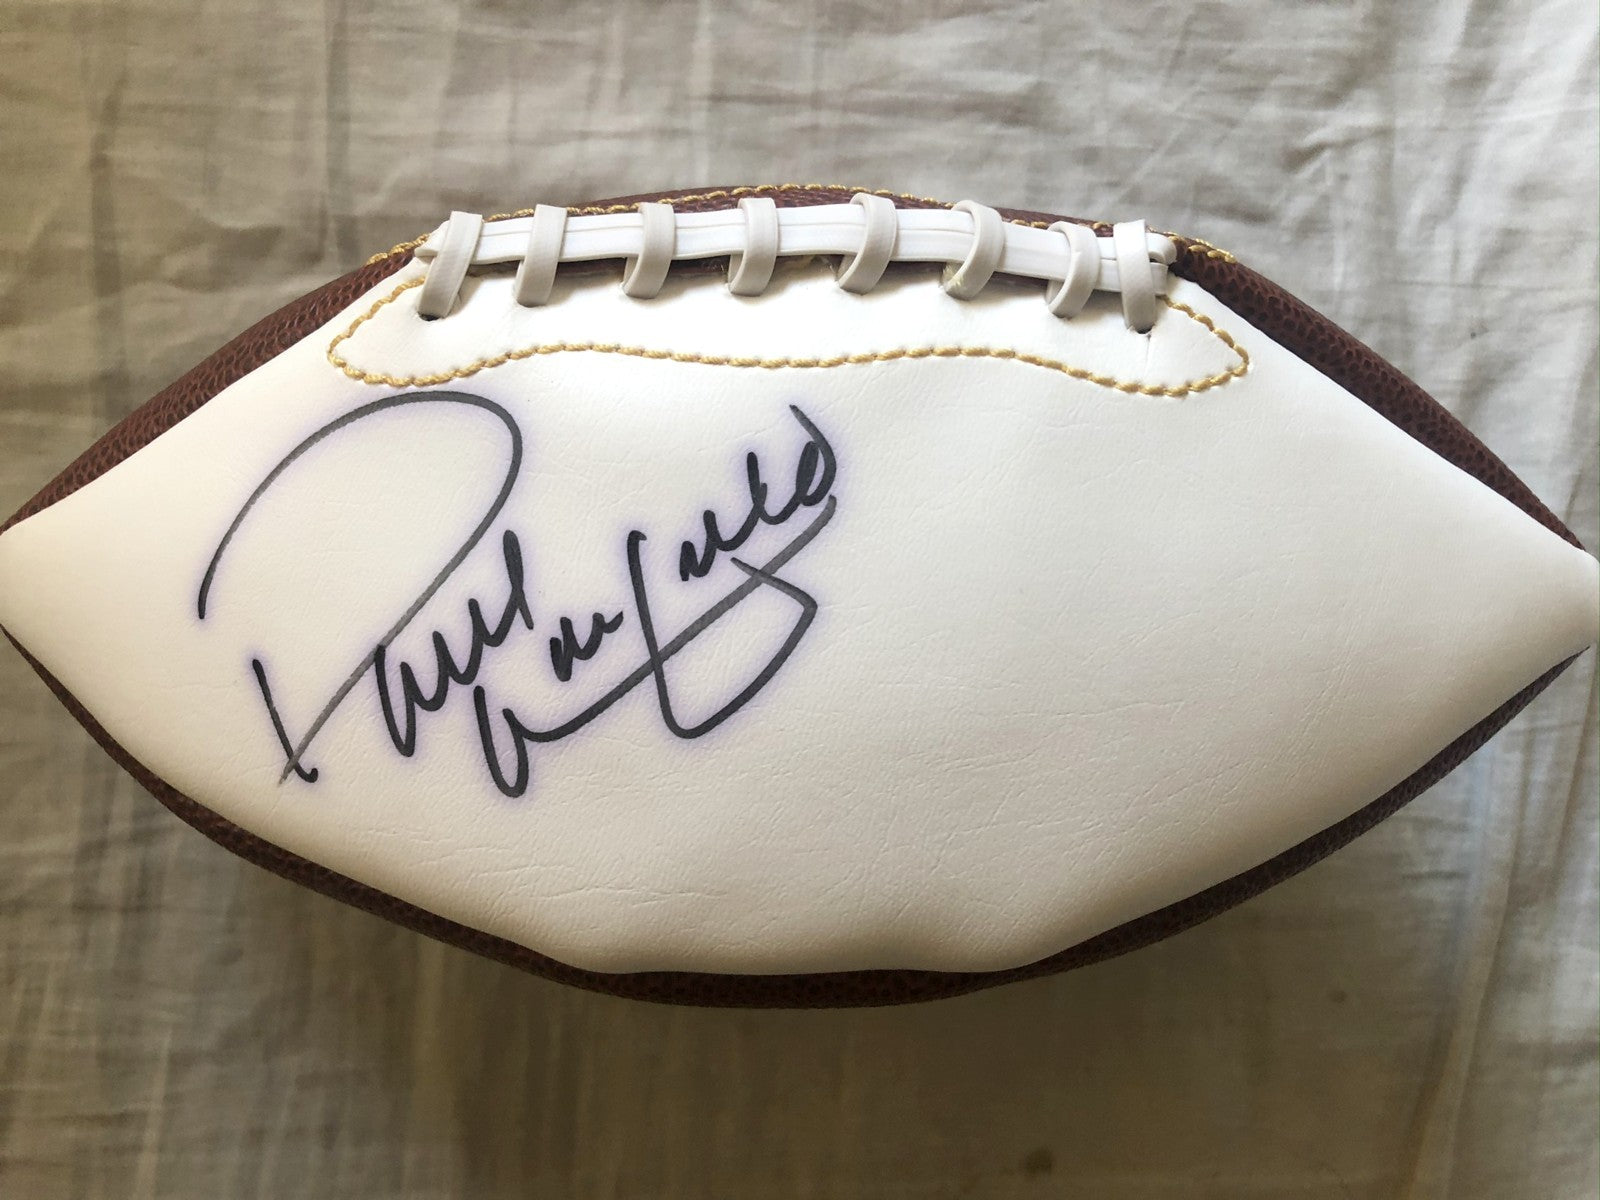 Paul Warfield autographed full size white panel football